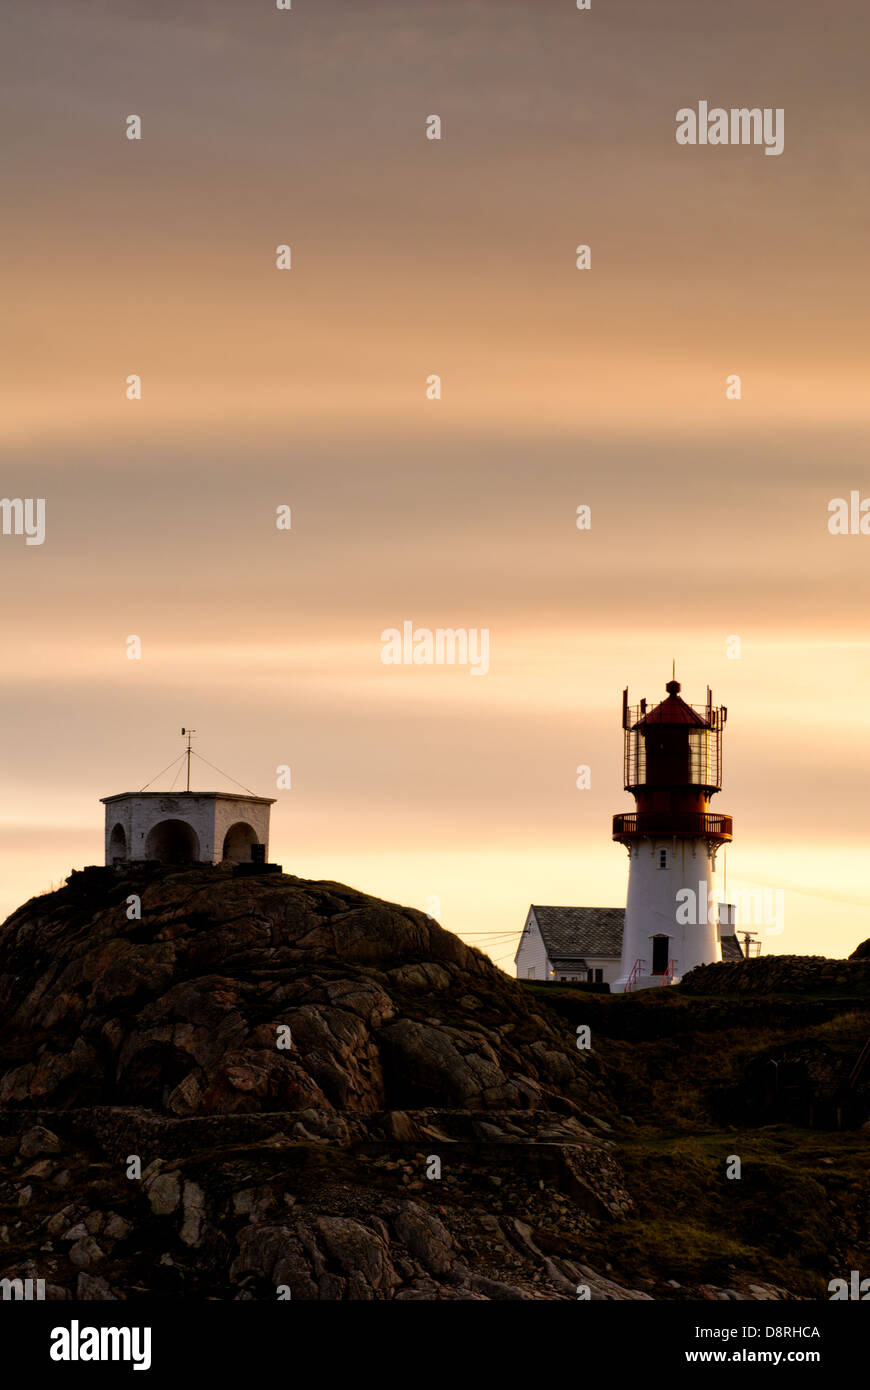 Sunset at Lindesnes lighthouse, Vest-Agder, Norway. Stock Photo